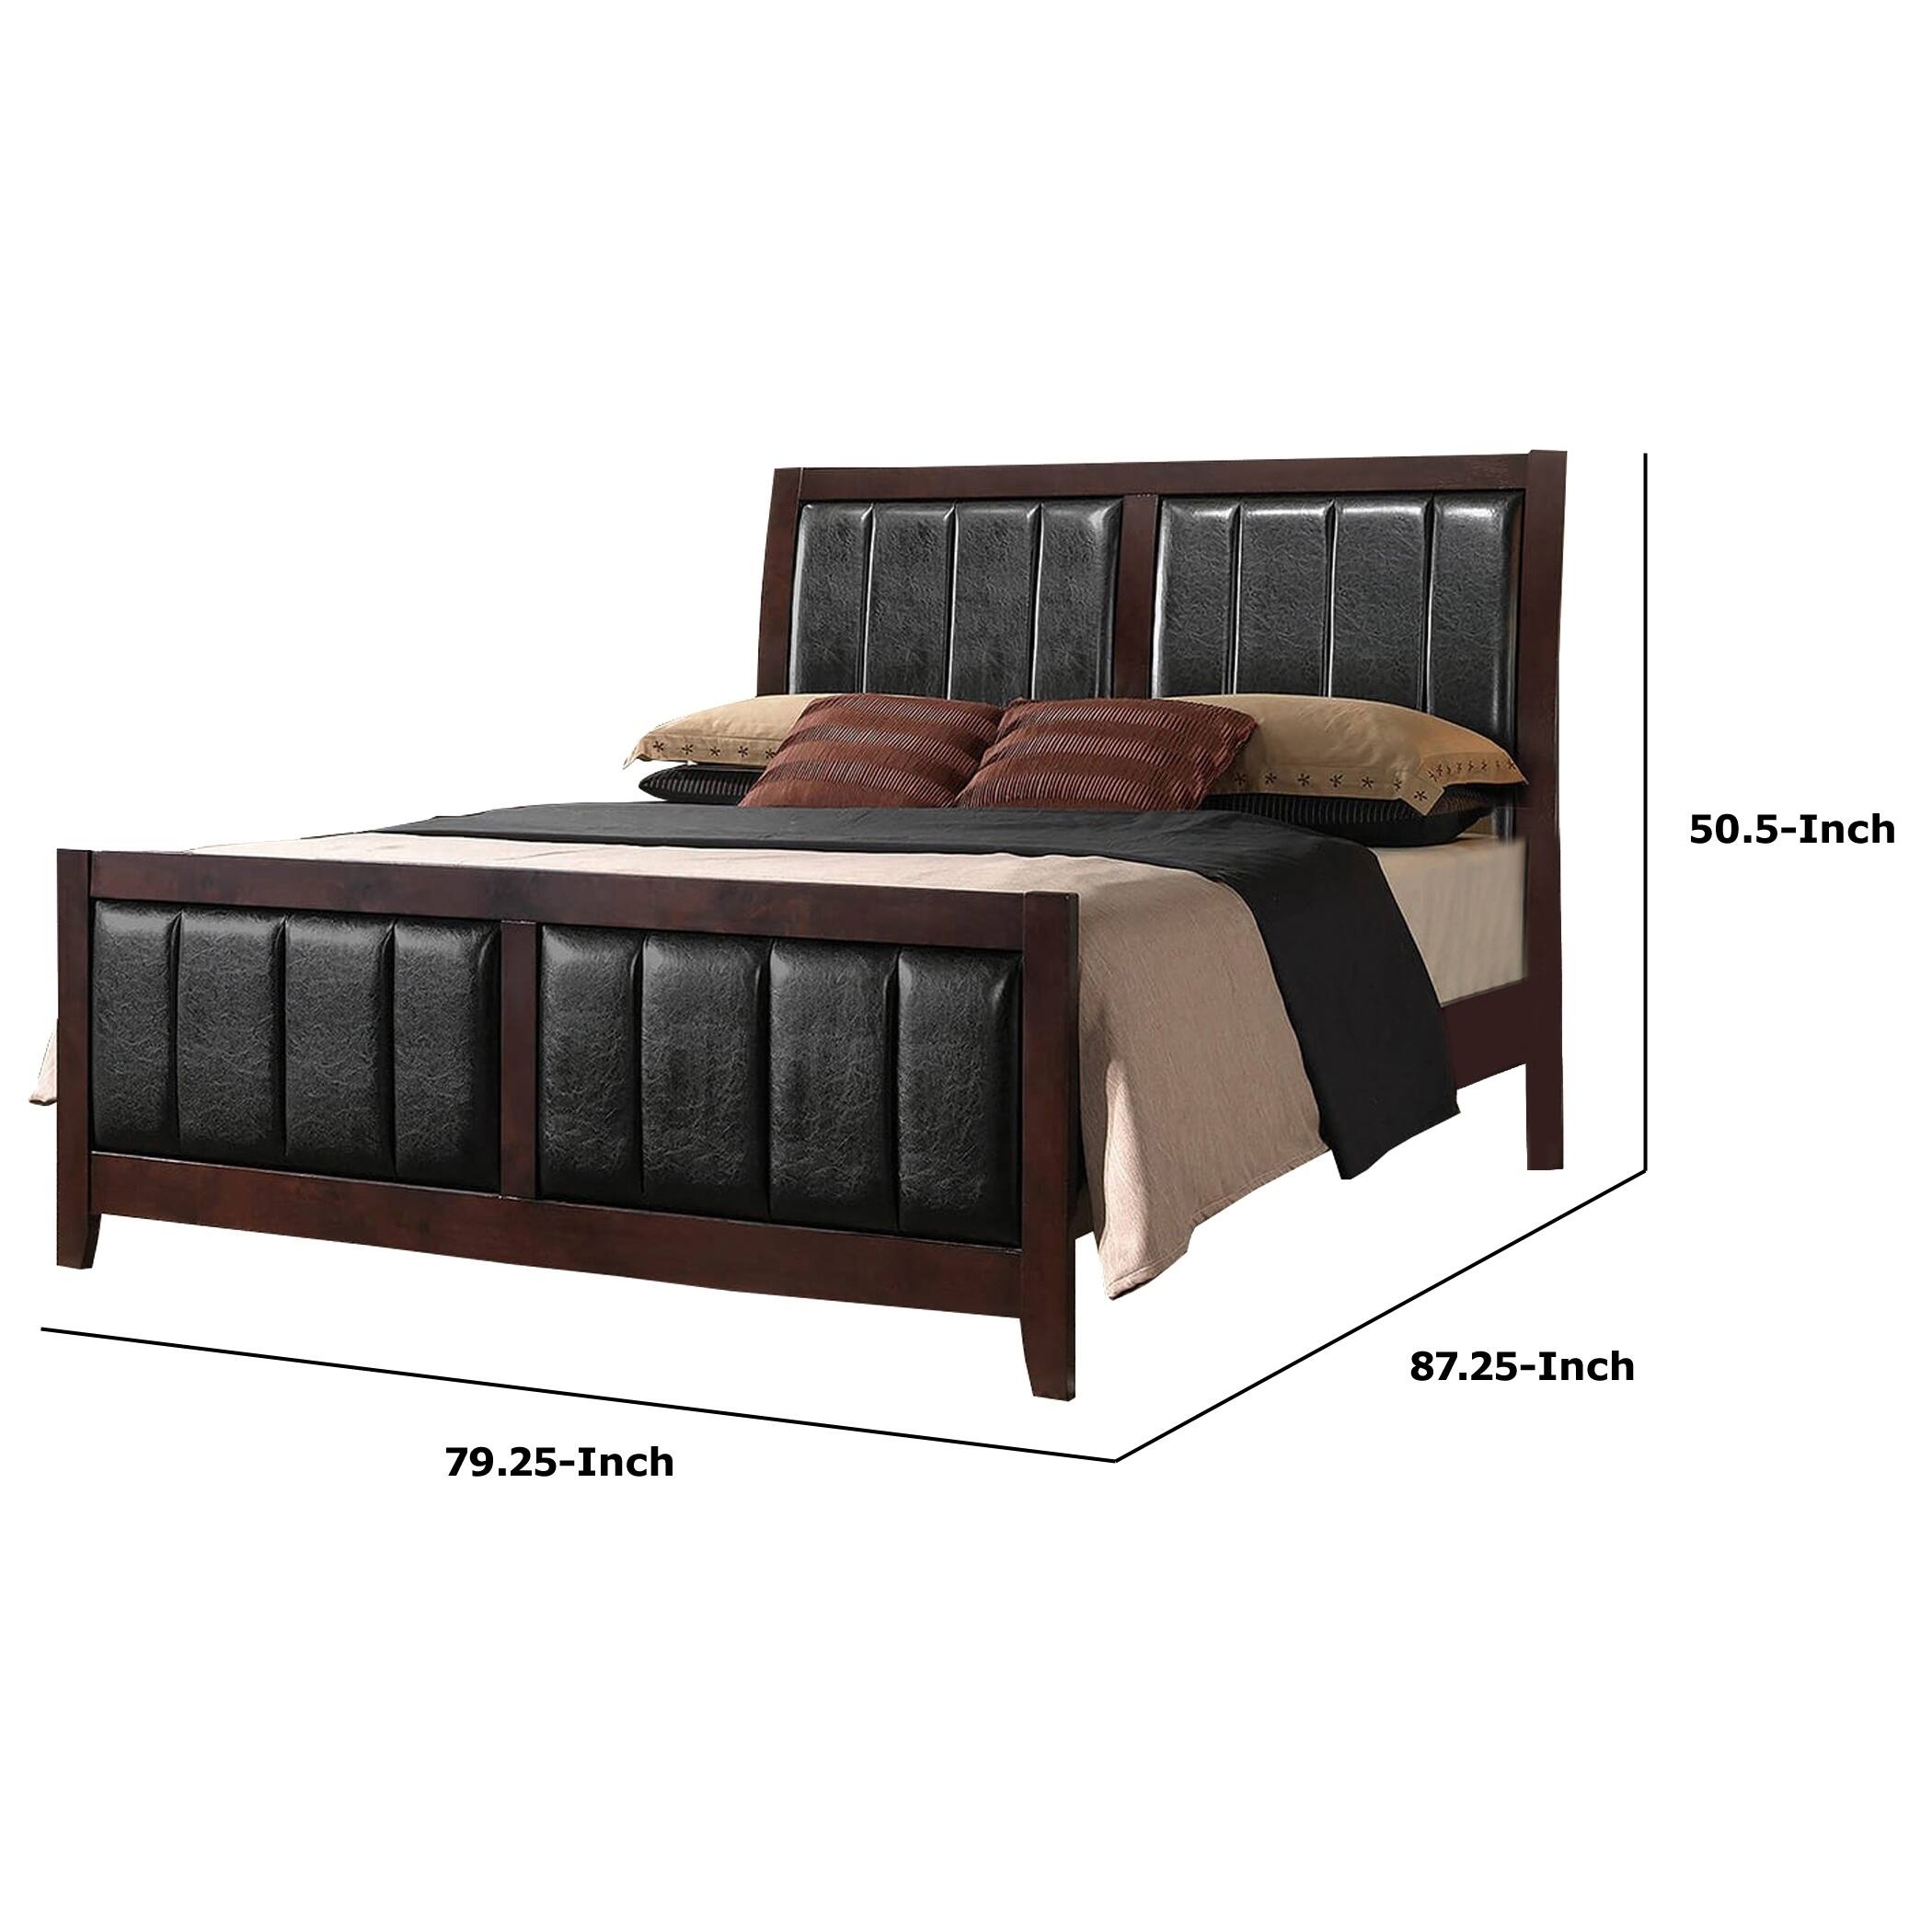 Leatherette Upholstered Wooden Eastern King Bed, Brown and Black